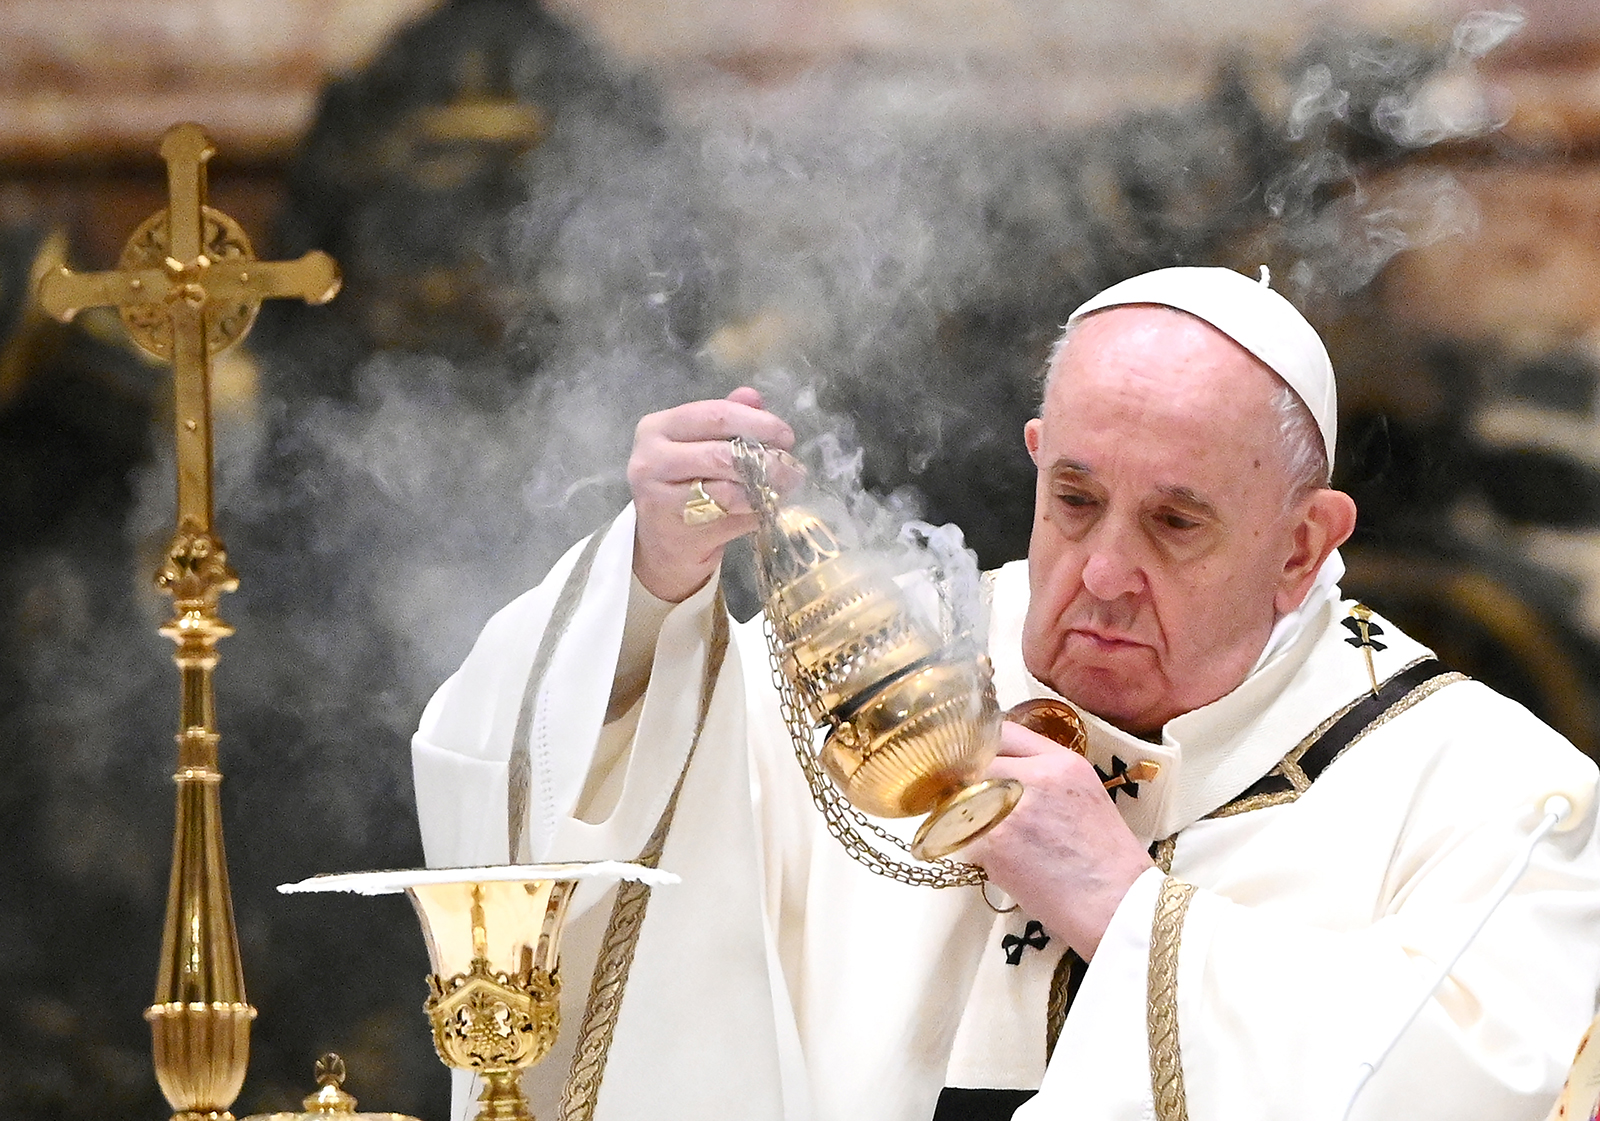 Pope Francis holds a thurible as he leads a Christmas Eve mass to mark the nativity of Jesus Christ on December 24, 2020, at St Peter's basilica in the Vatican.